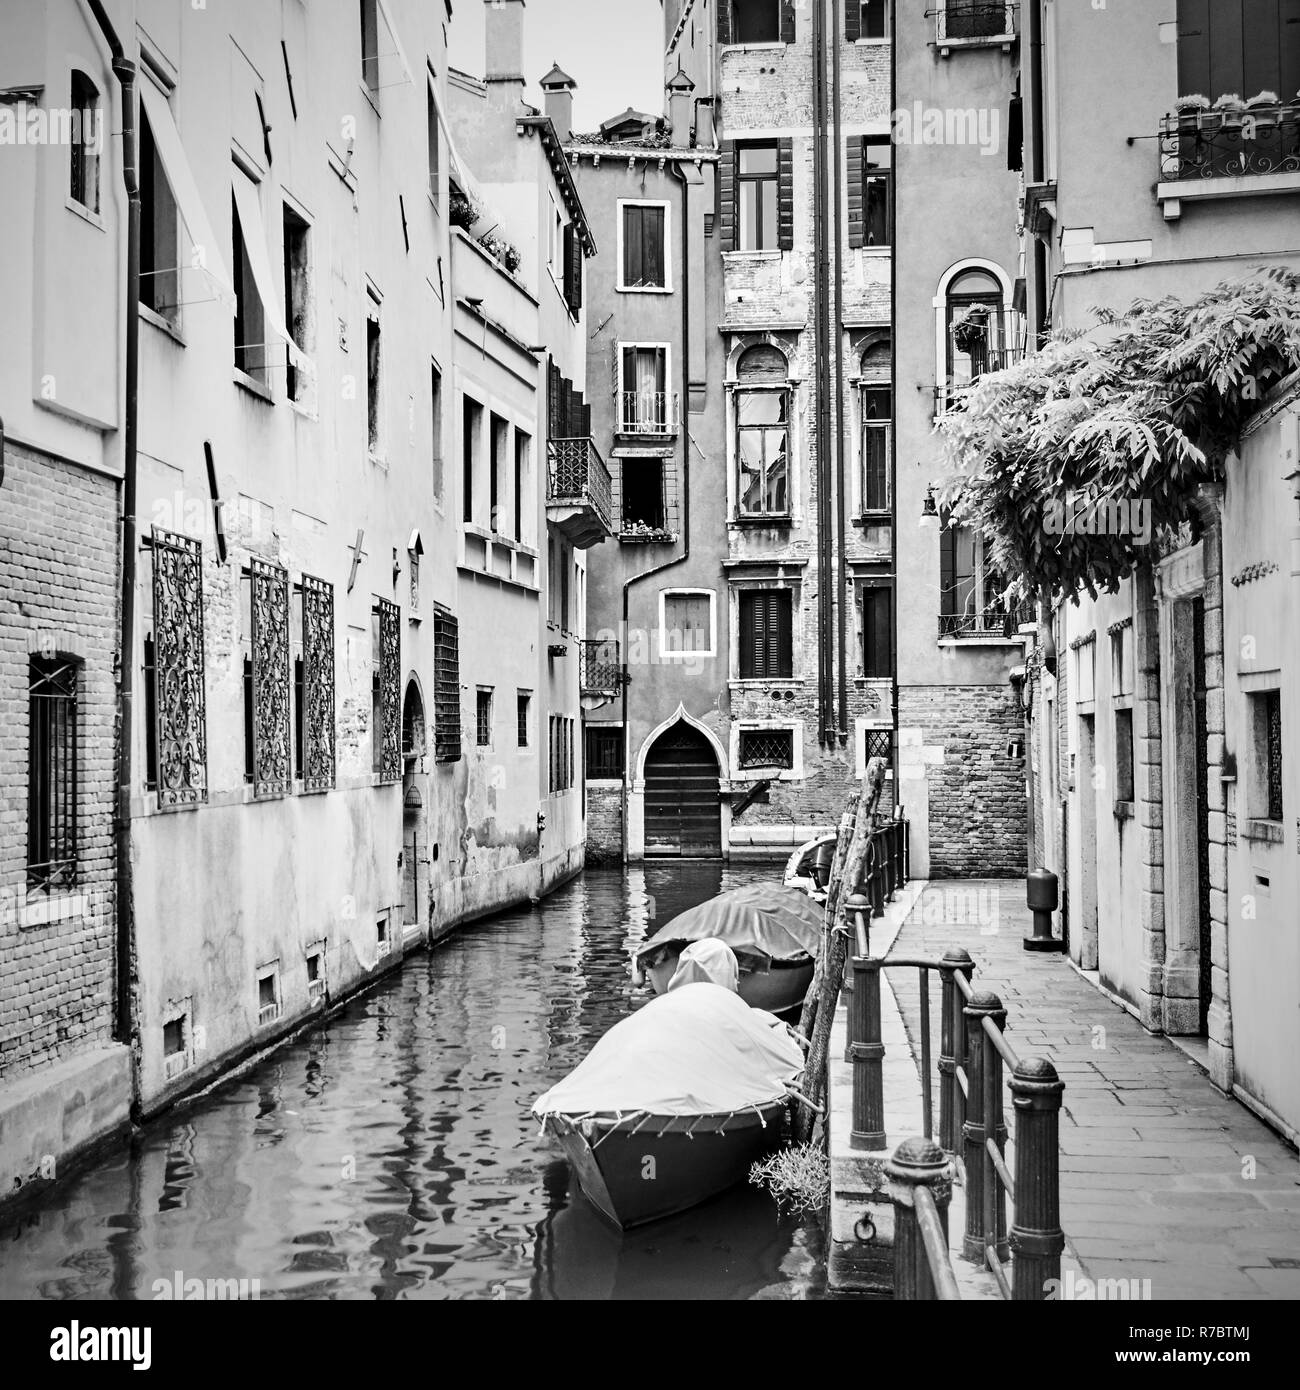 Narrow side canal with moored motorboats in Venice, Italy. Black and white image Stock Photo